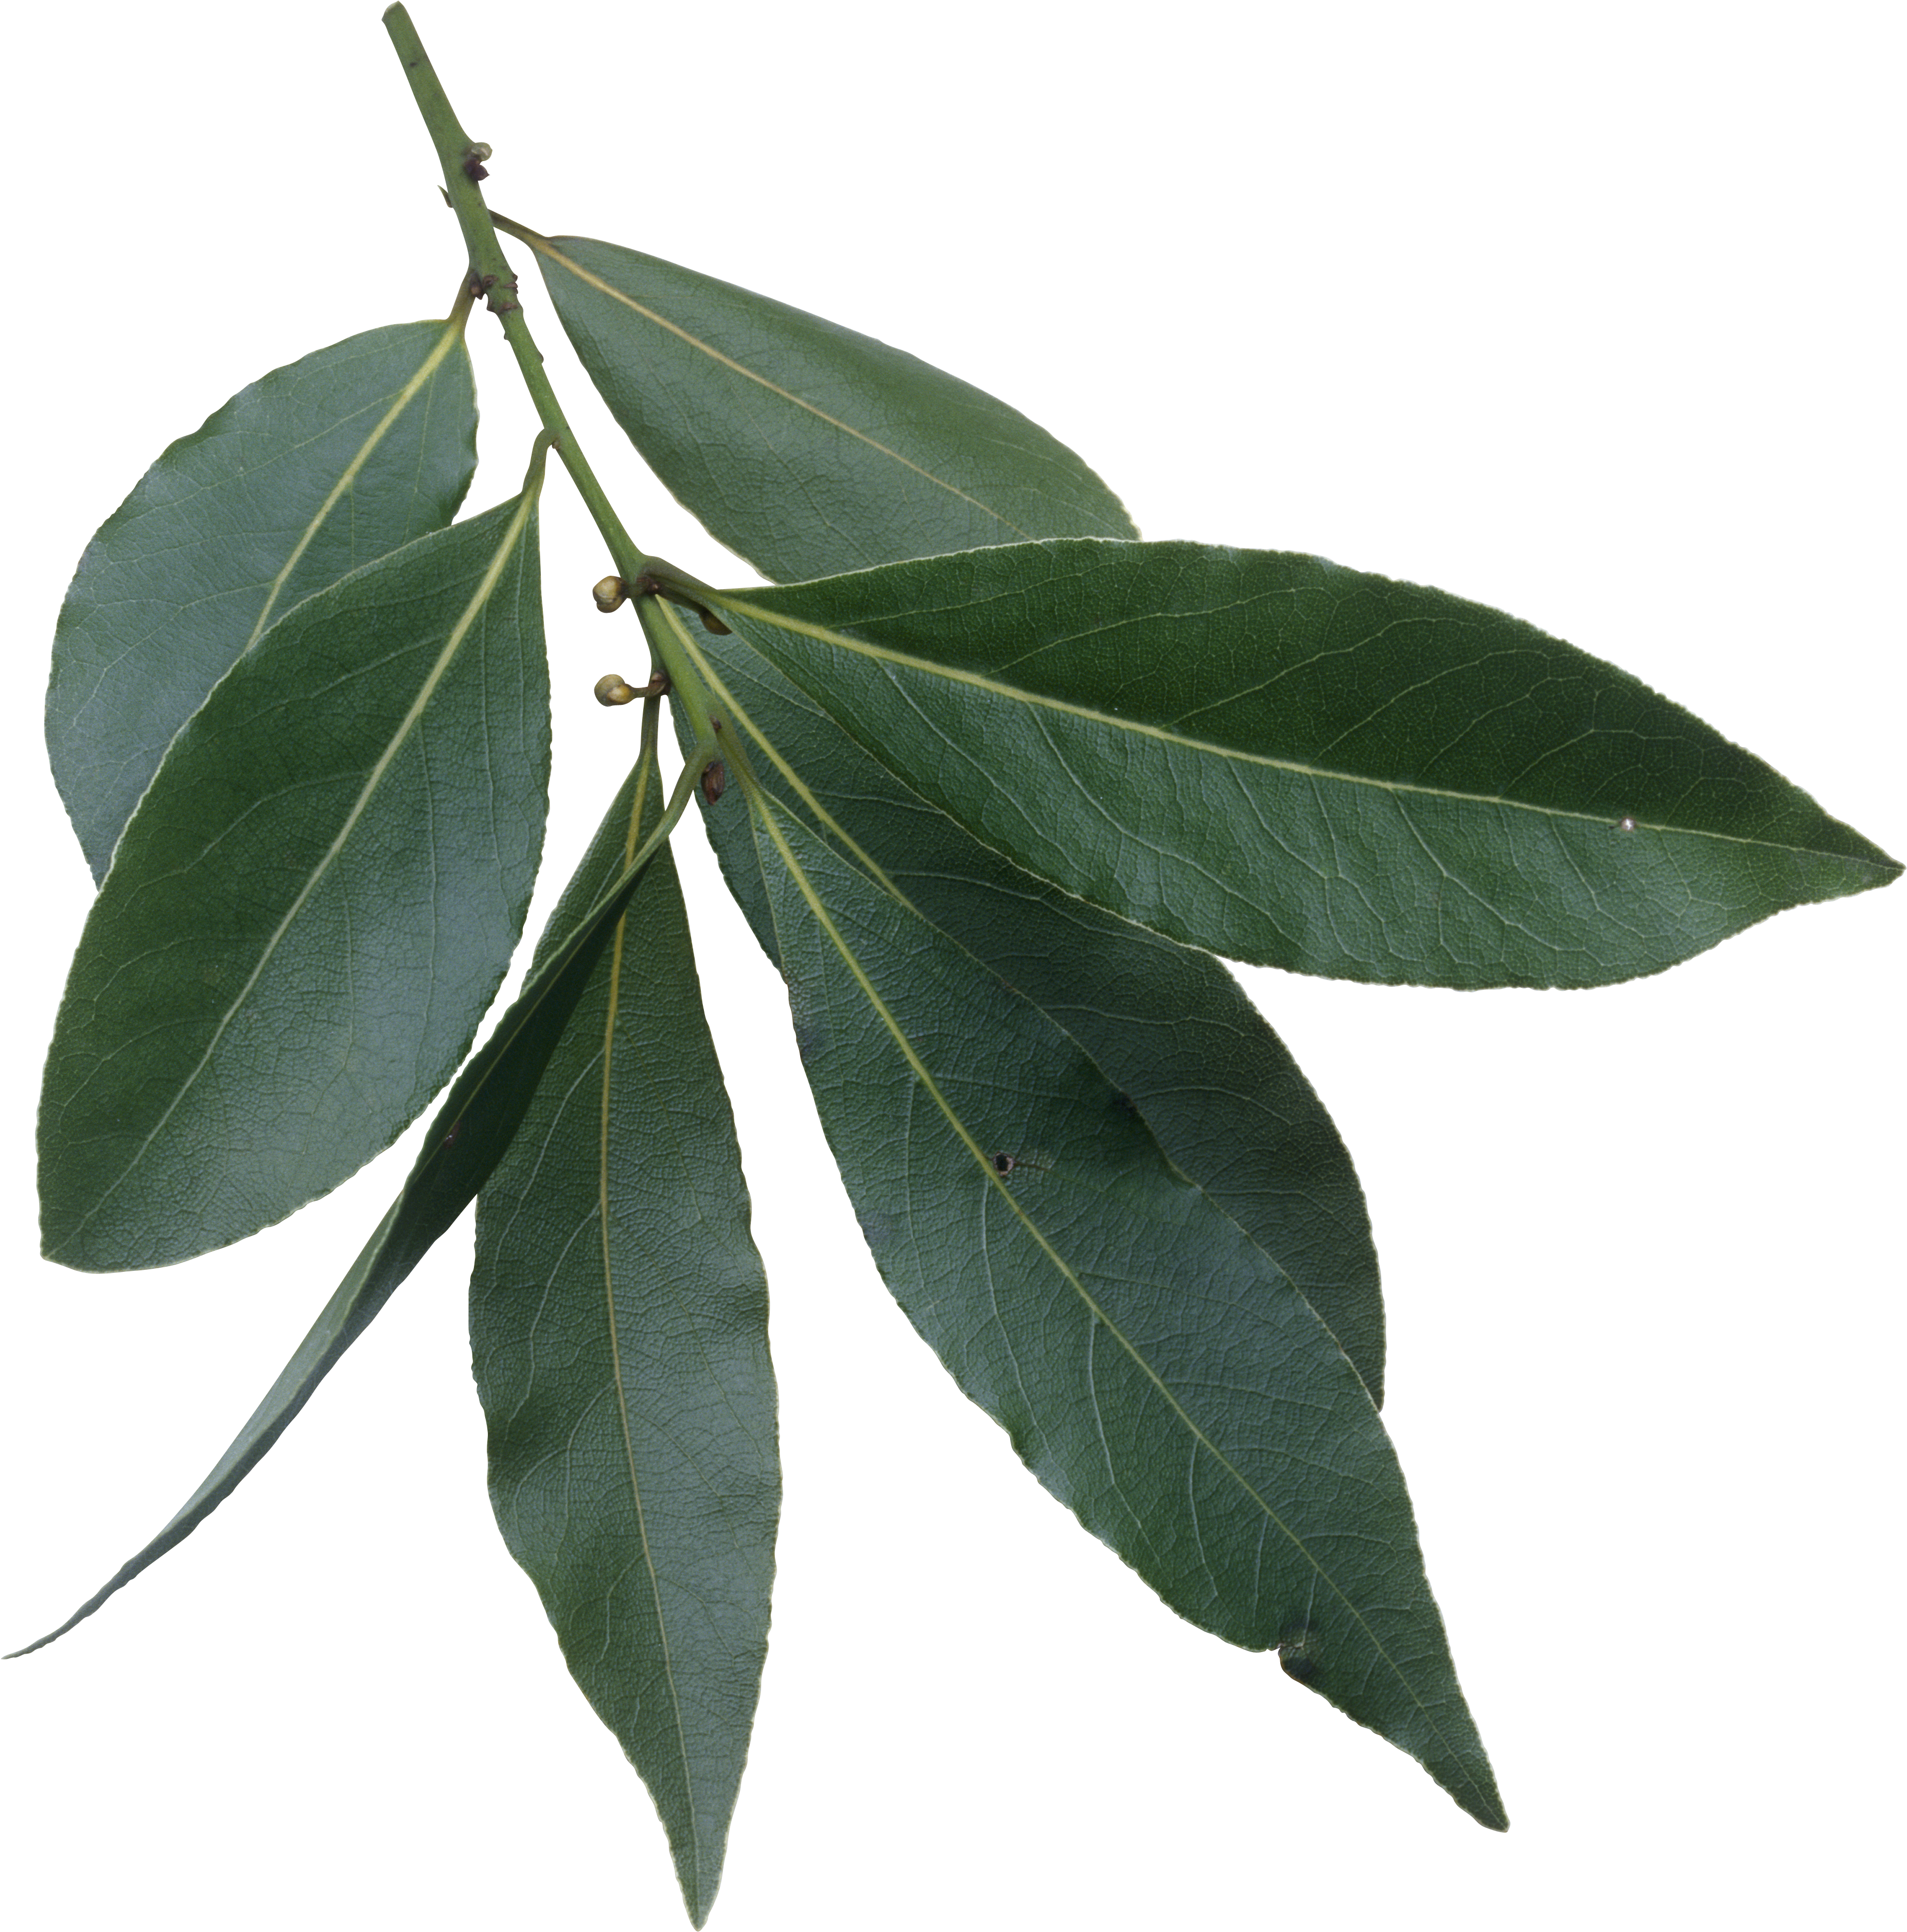 Download Laurus Nobilis Leaves Fresh Bay Leaves Png Png Image With No Background Pngkey Com